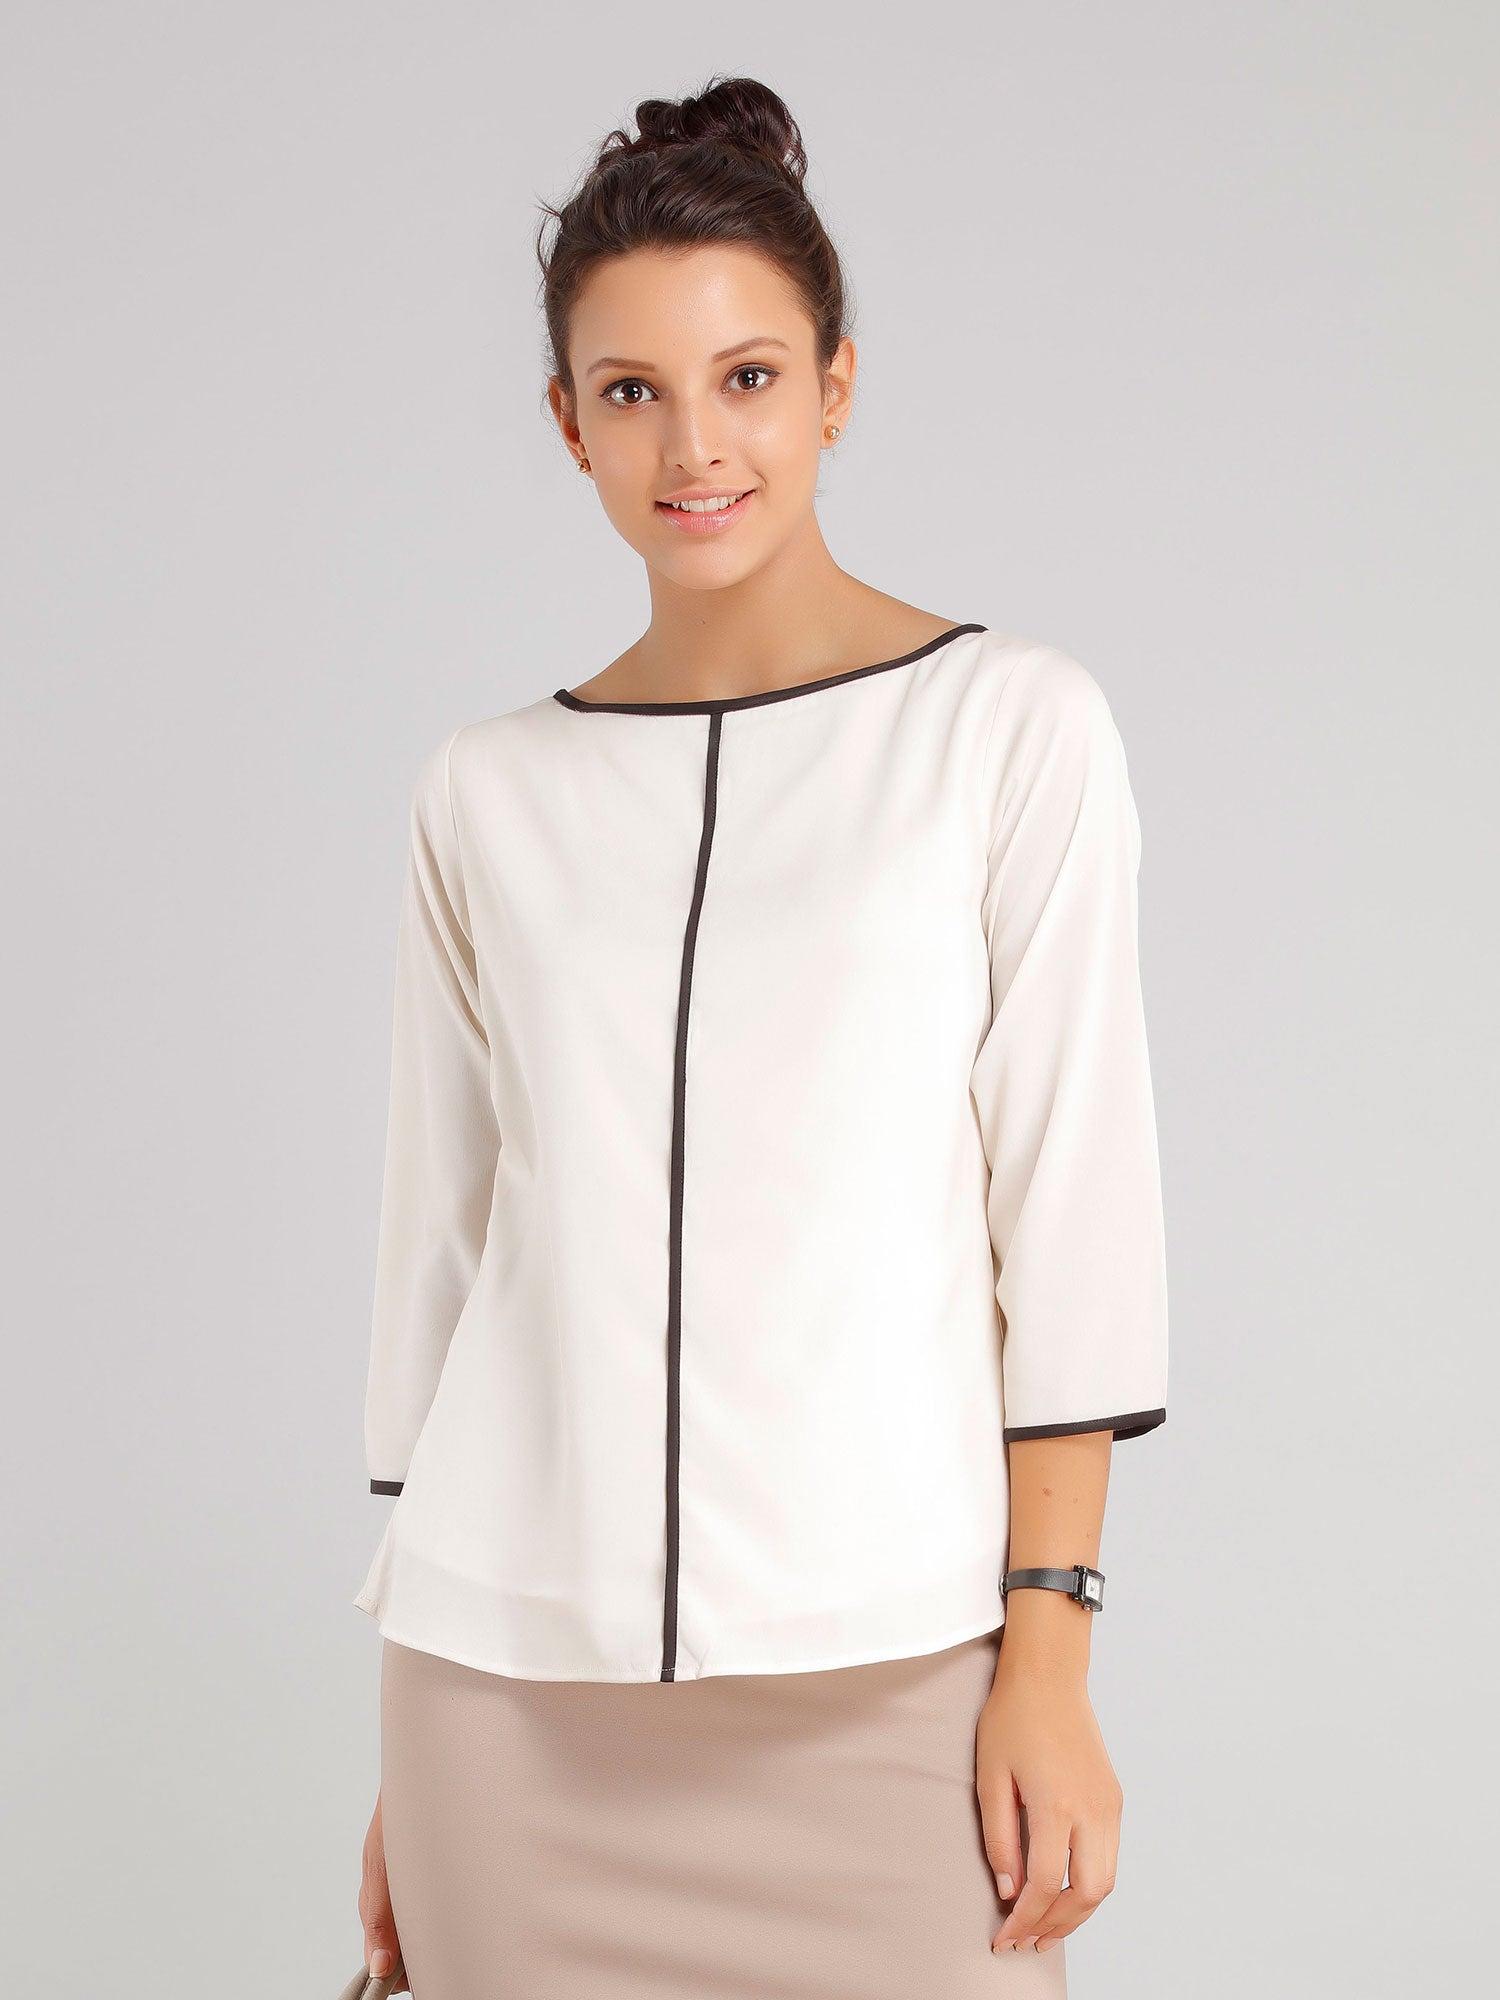 Boat Neck Top - Off White| Formal Tops